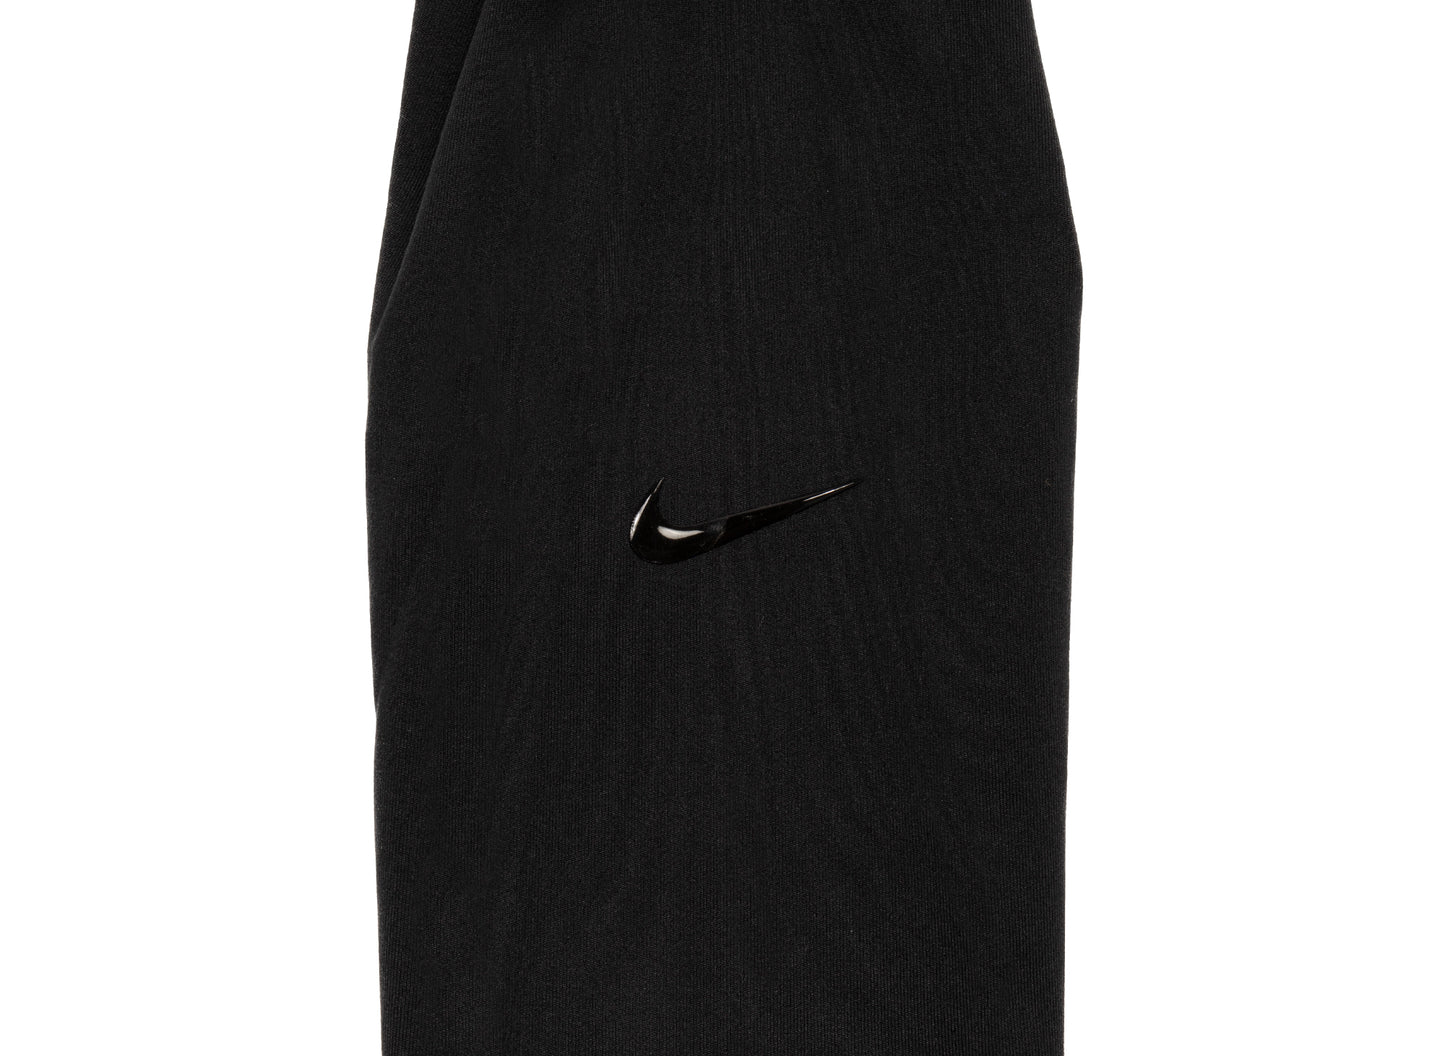 Women's Nike One Luxe Tights